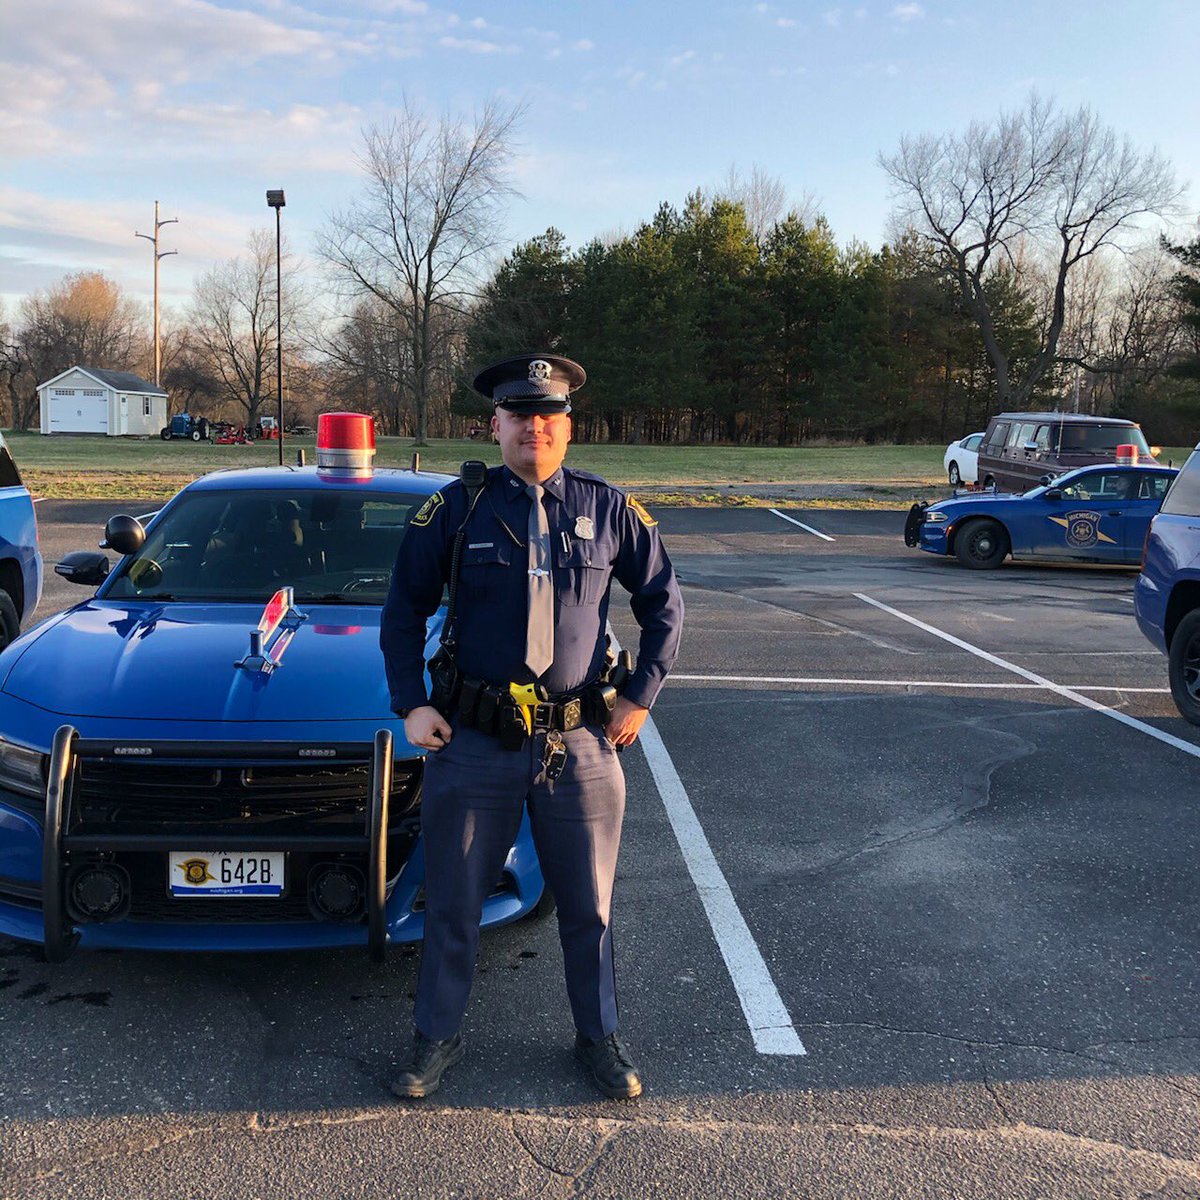 Members of the Michigan State Police continue to  #DoMIpart during the  #COVID19 emergency. Here’s a look at the  #ViewFromMyOffice of Trooper Awad of the Lakeview Post getting ready to start his shift.